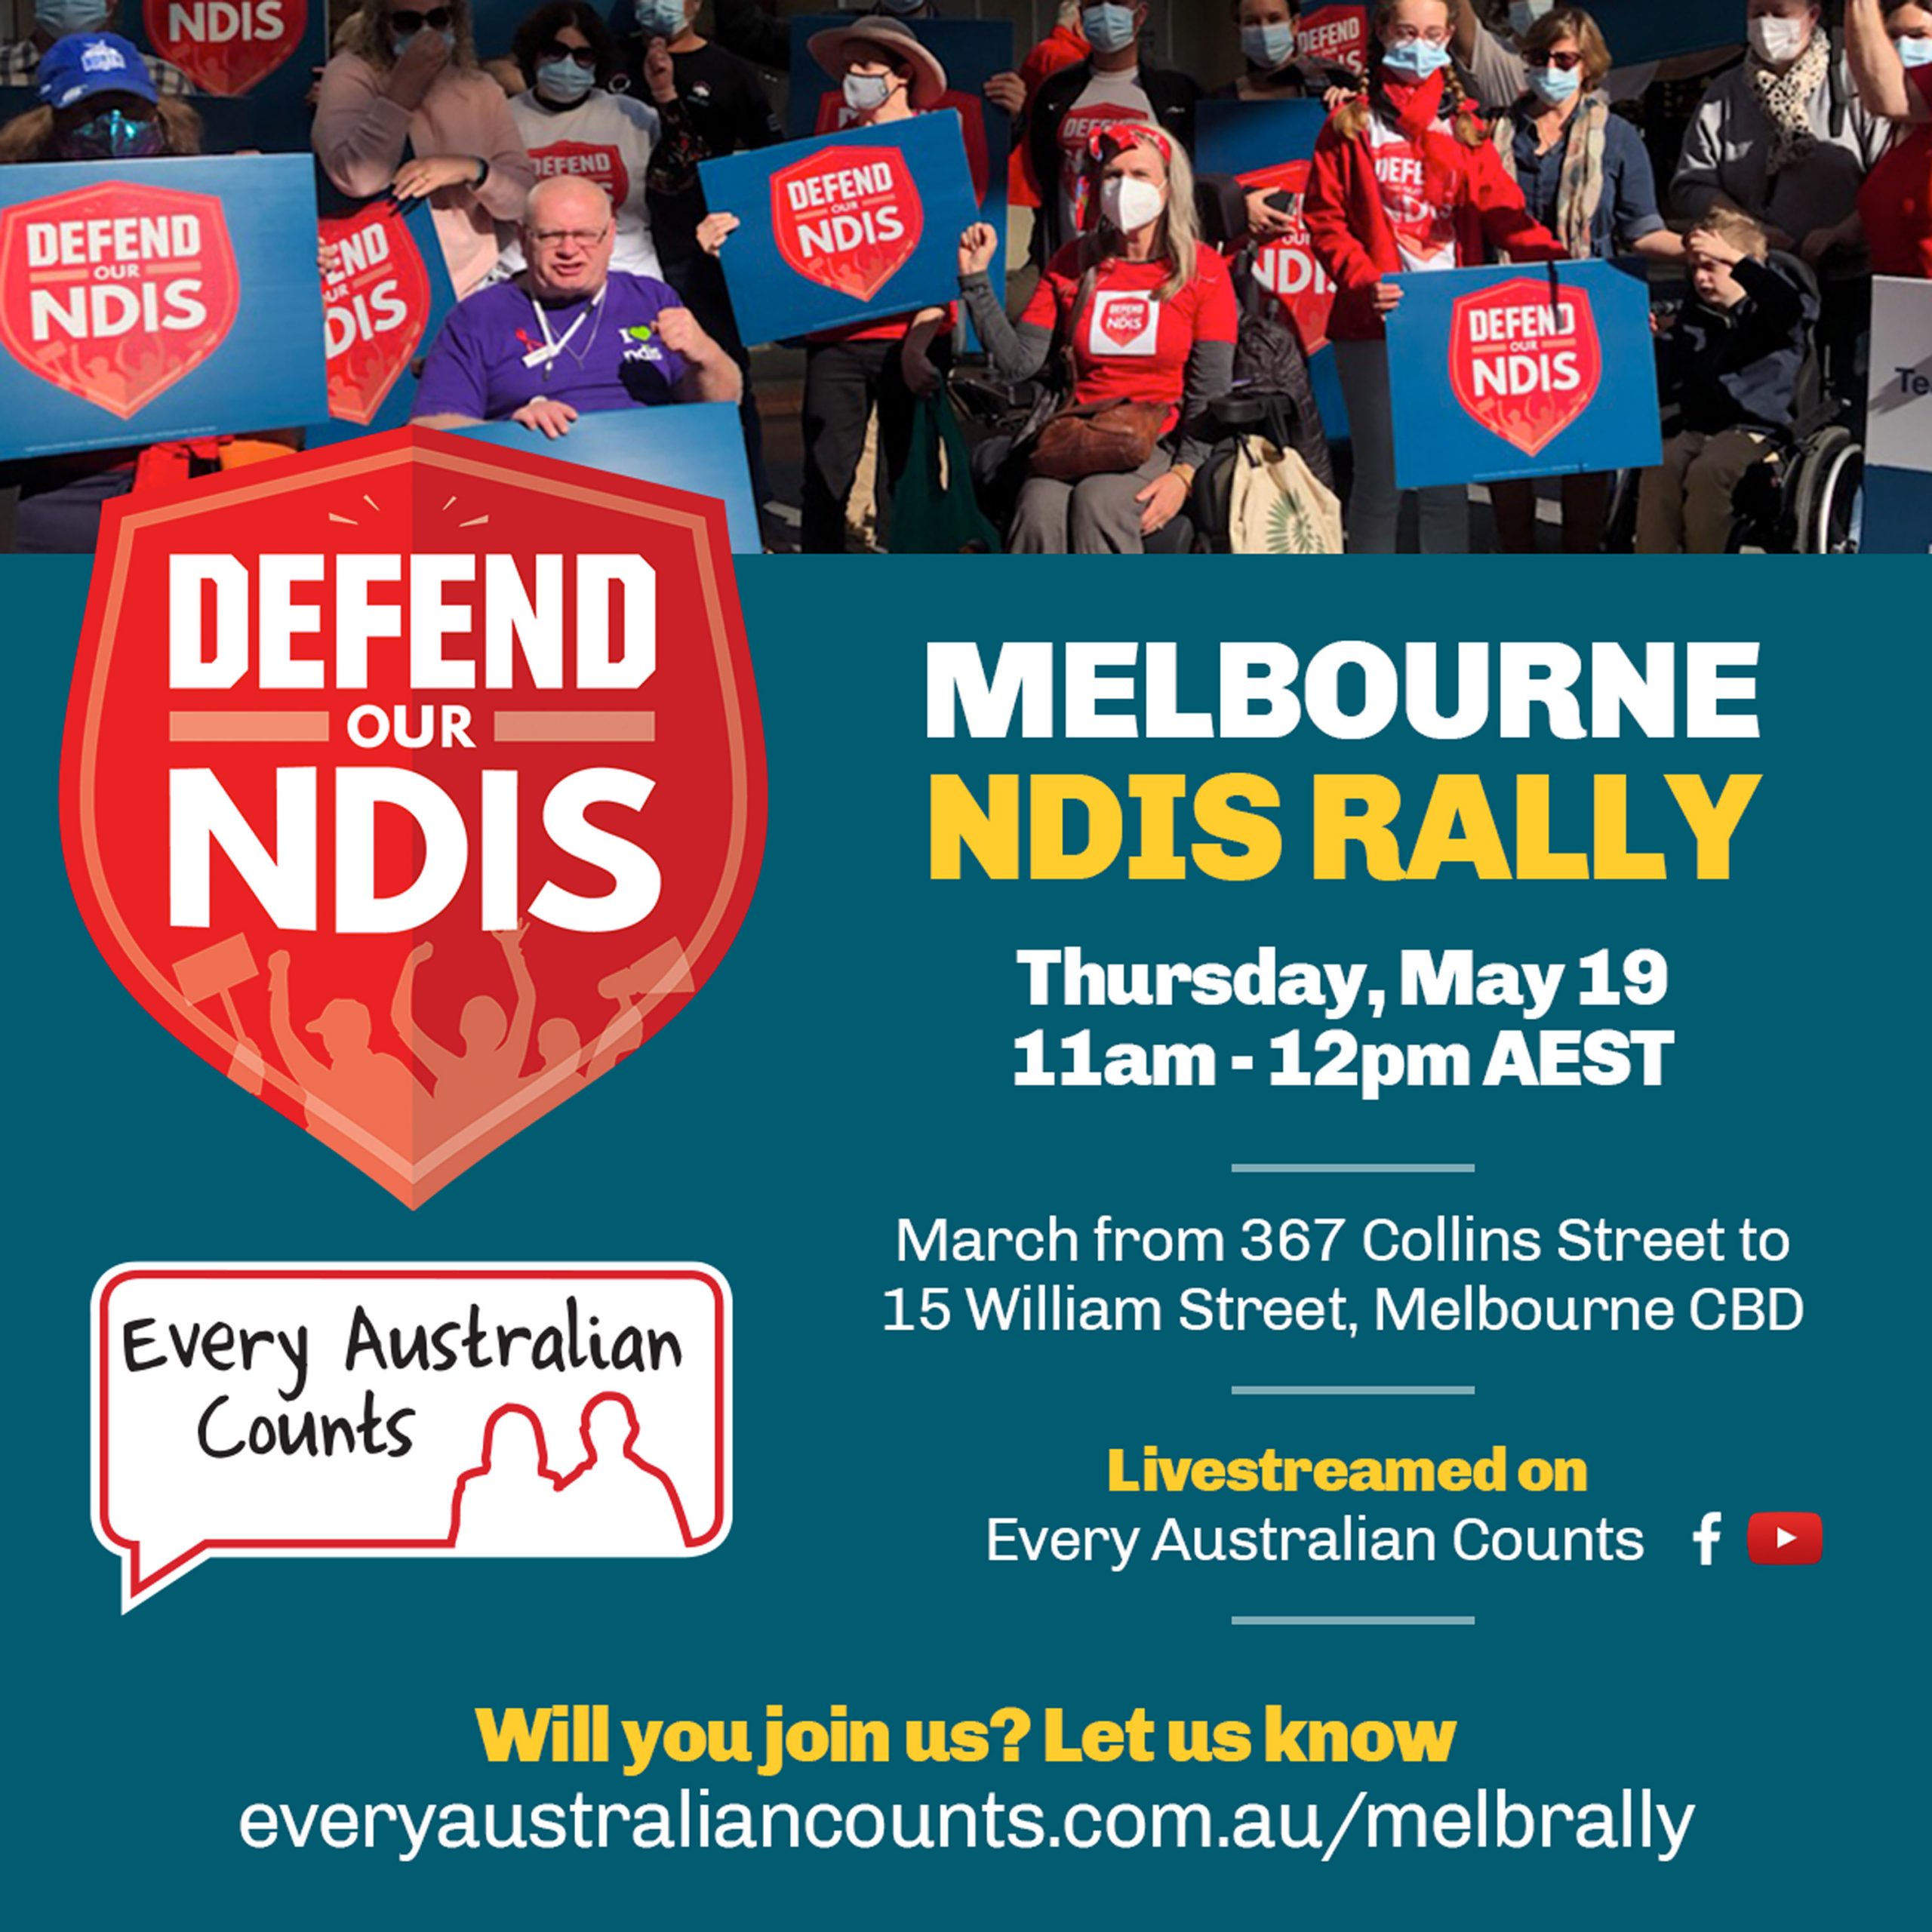 Photo of people rallying with Defend our NDIS signs, Every Australian Counts tshirts, and a megaphone. The text reads 